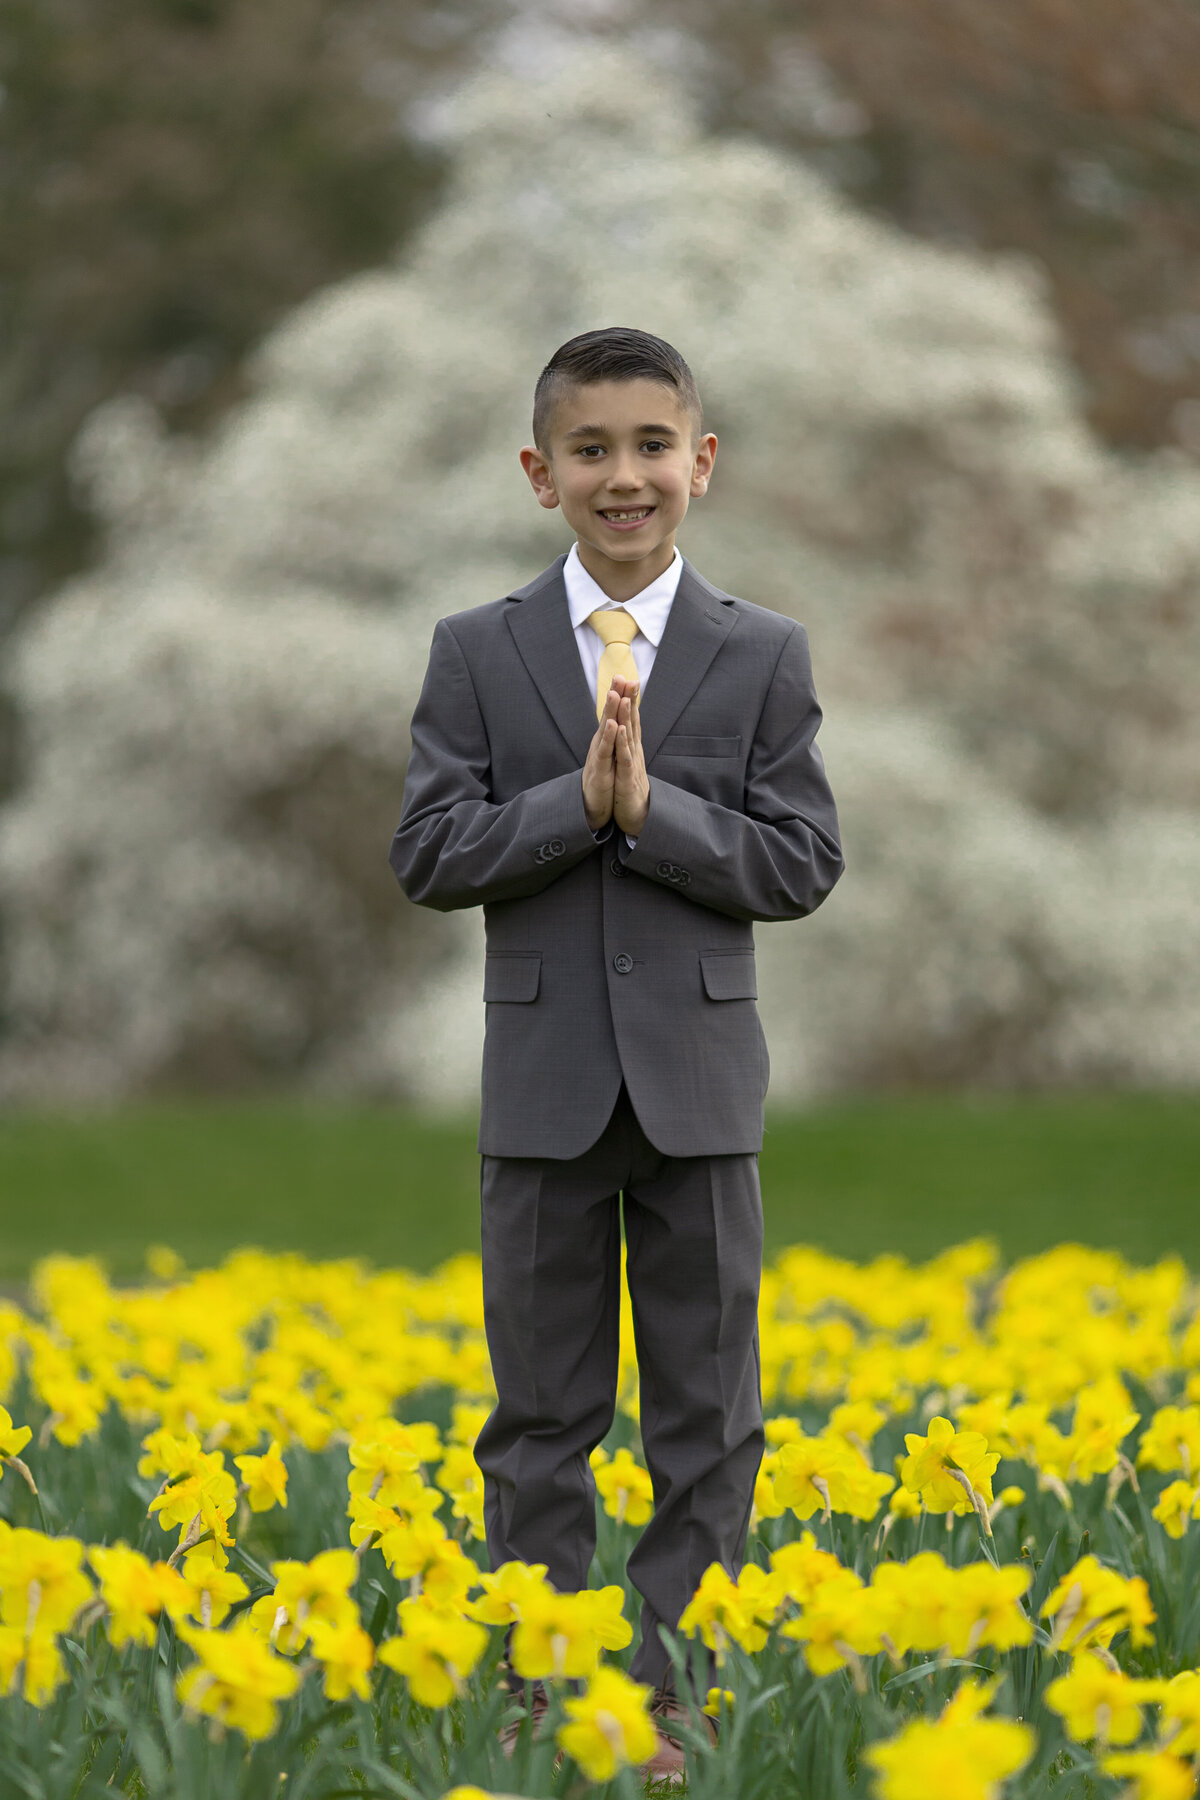 A boy prays with a smile while standing in a grey suit in a field of yellow daffodils